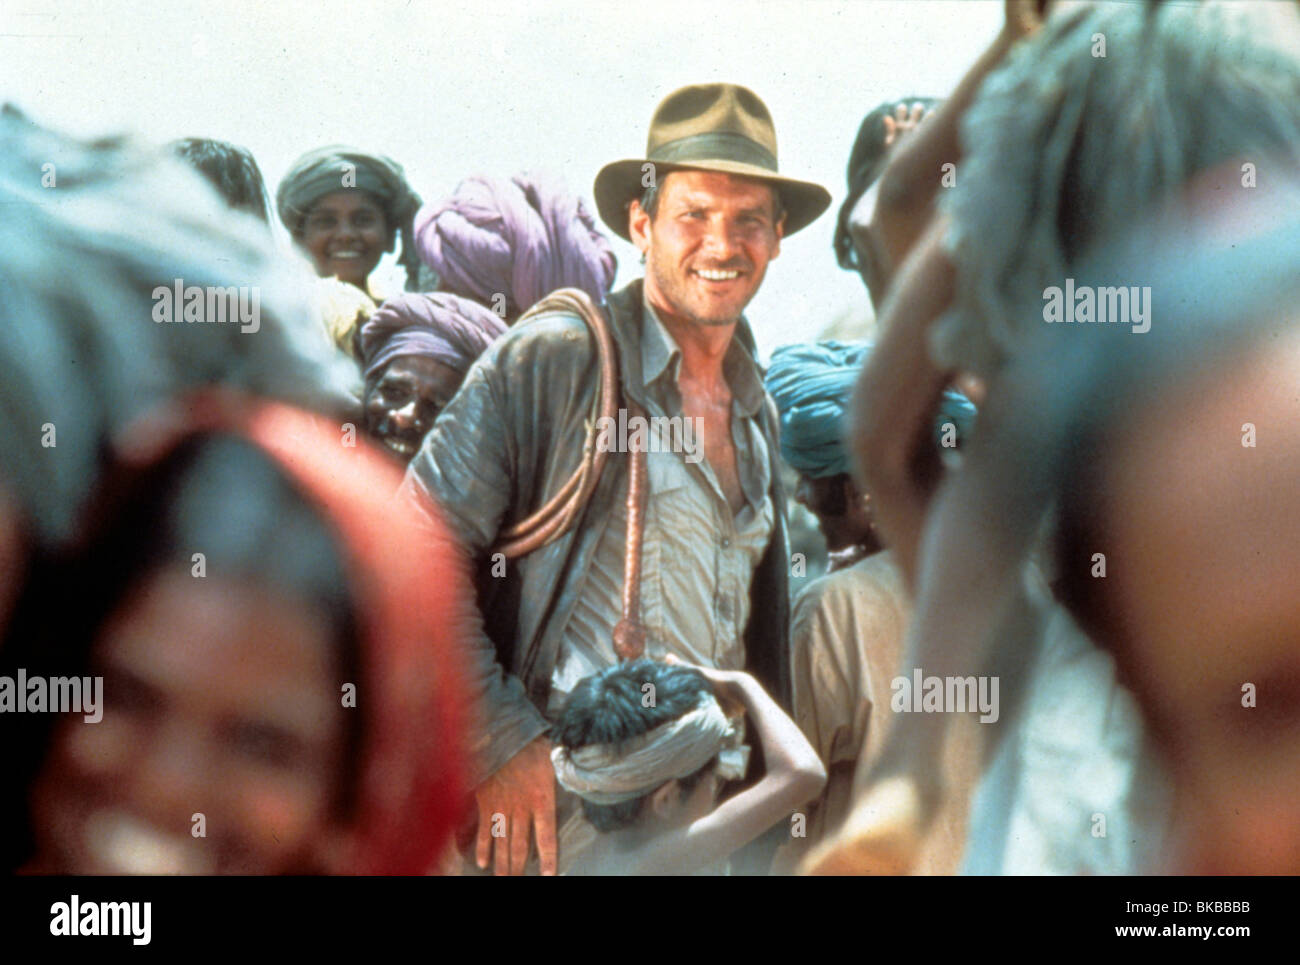 INDIANA JONES AND THE TEMPLE OF DOOM (1984) HARRISON FORD INT 005 Stock Photo